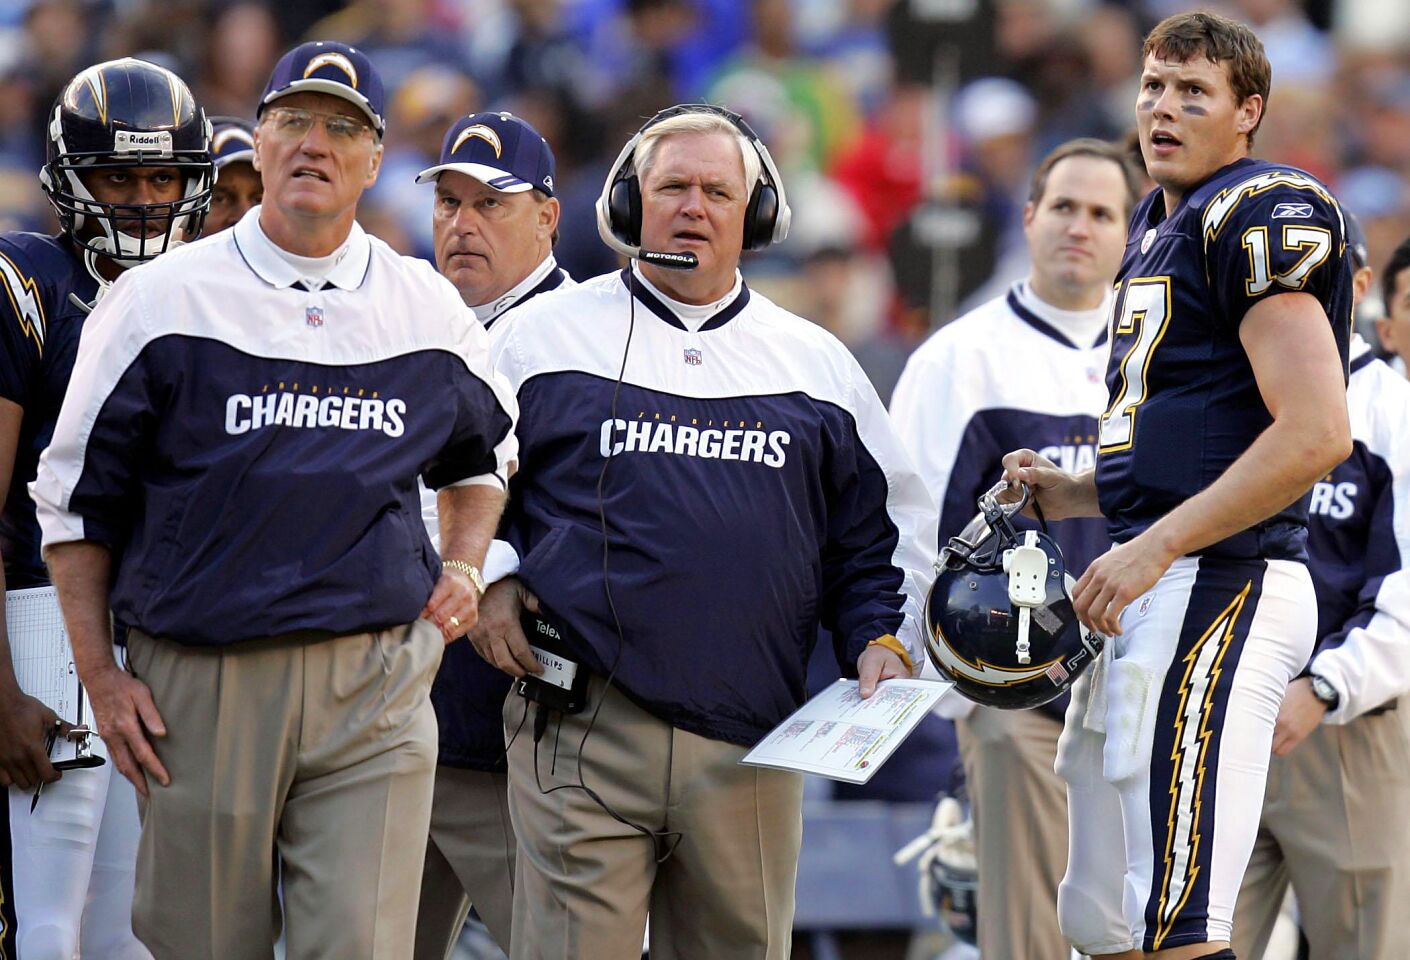 Chargers coach Marty Schottenheimer, Wade Phillips, and Philip Rivers look at video board after play against the Chiefs at Qualcomm Stadium on Jan. 2, 2005.